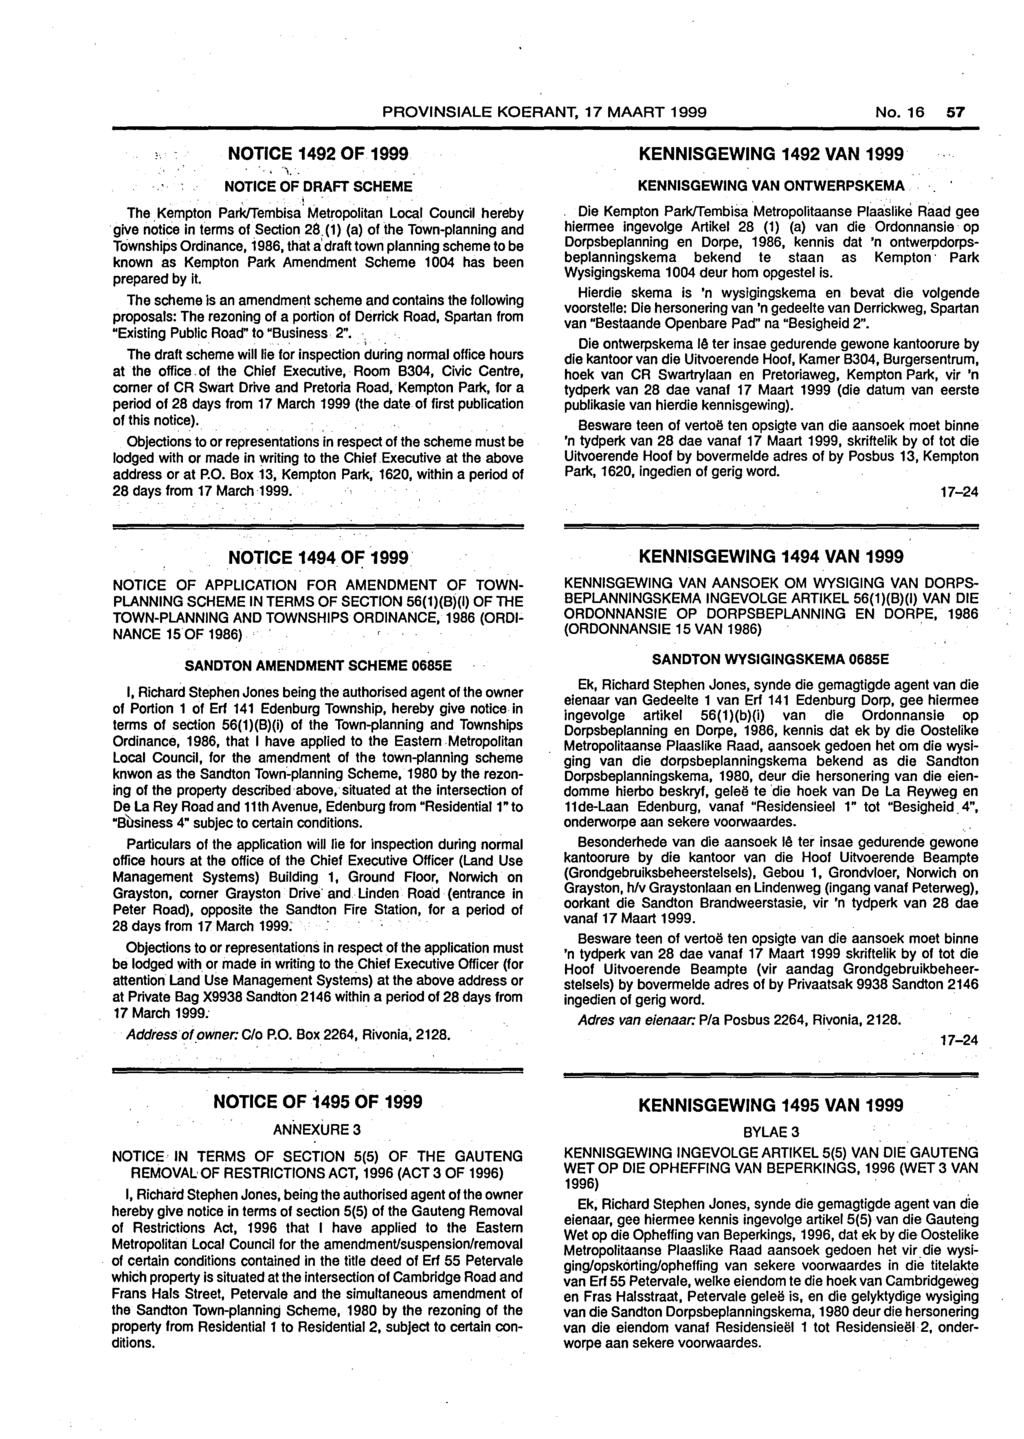 PROVINSIALE KOERANT, 17 MAART 1999 No. 16 57 NOTICE 1492 OF 1999.... NOTICE OF DRAFT SCHEME The Kempton Parkrrembisa 1 Metropolitan Local Council hereby give notice in terms of Section 28.